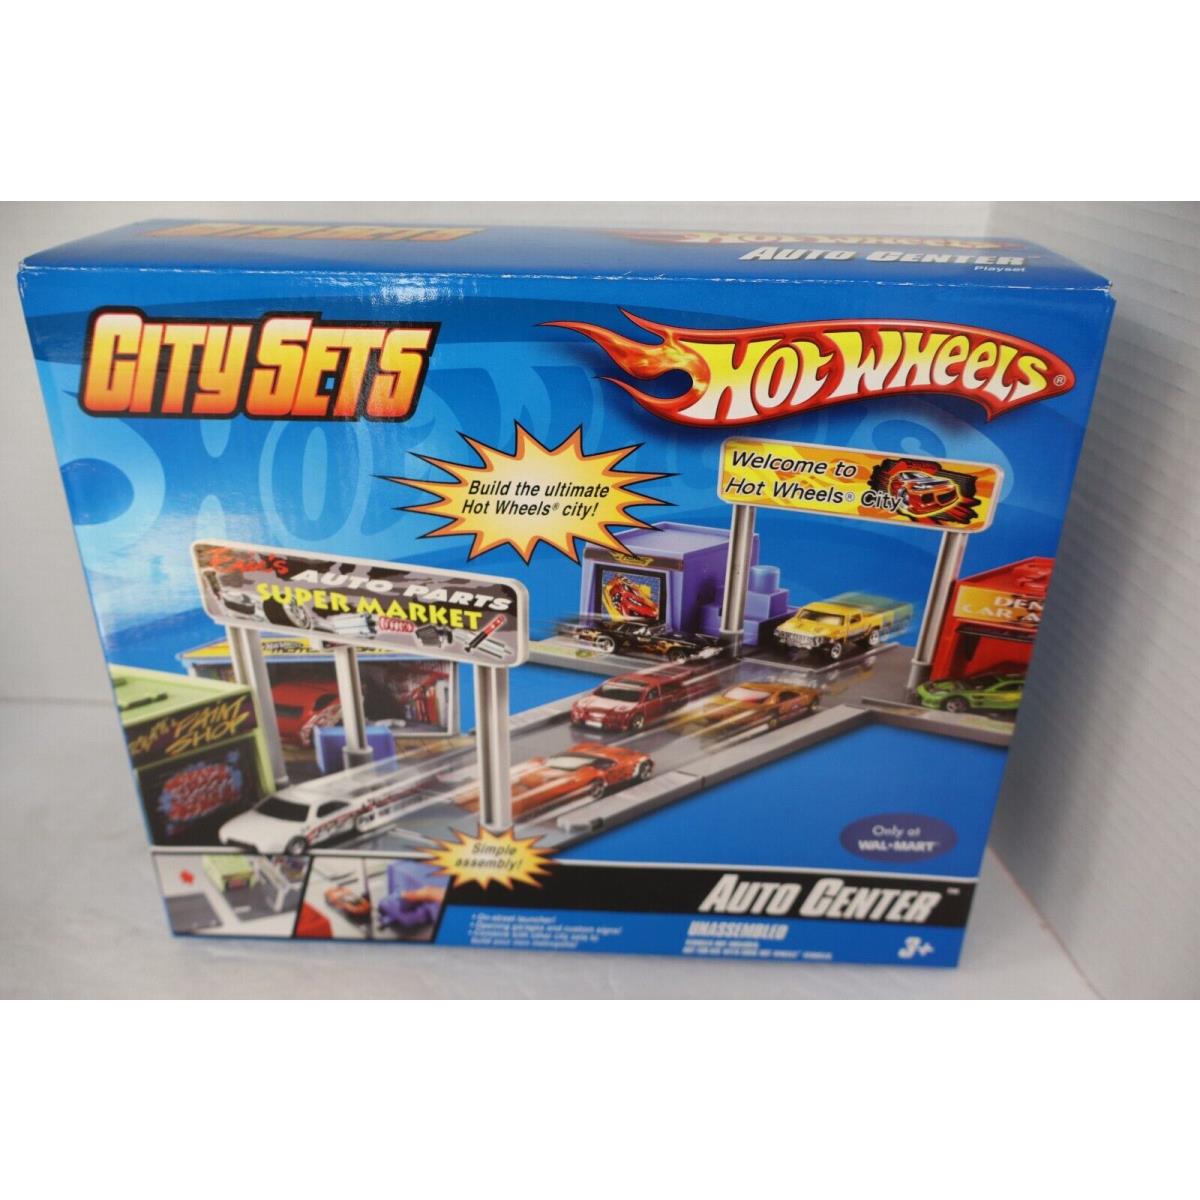 2008 Hot Wheels City Sets Auto Center Play Set Only at Walmart